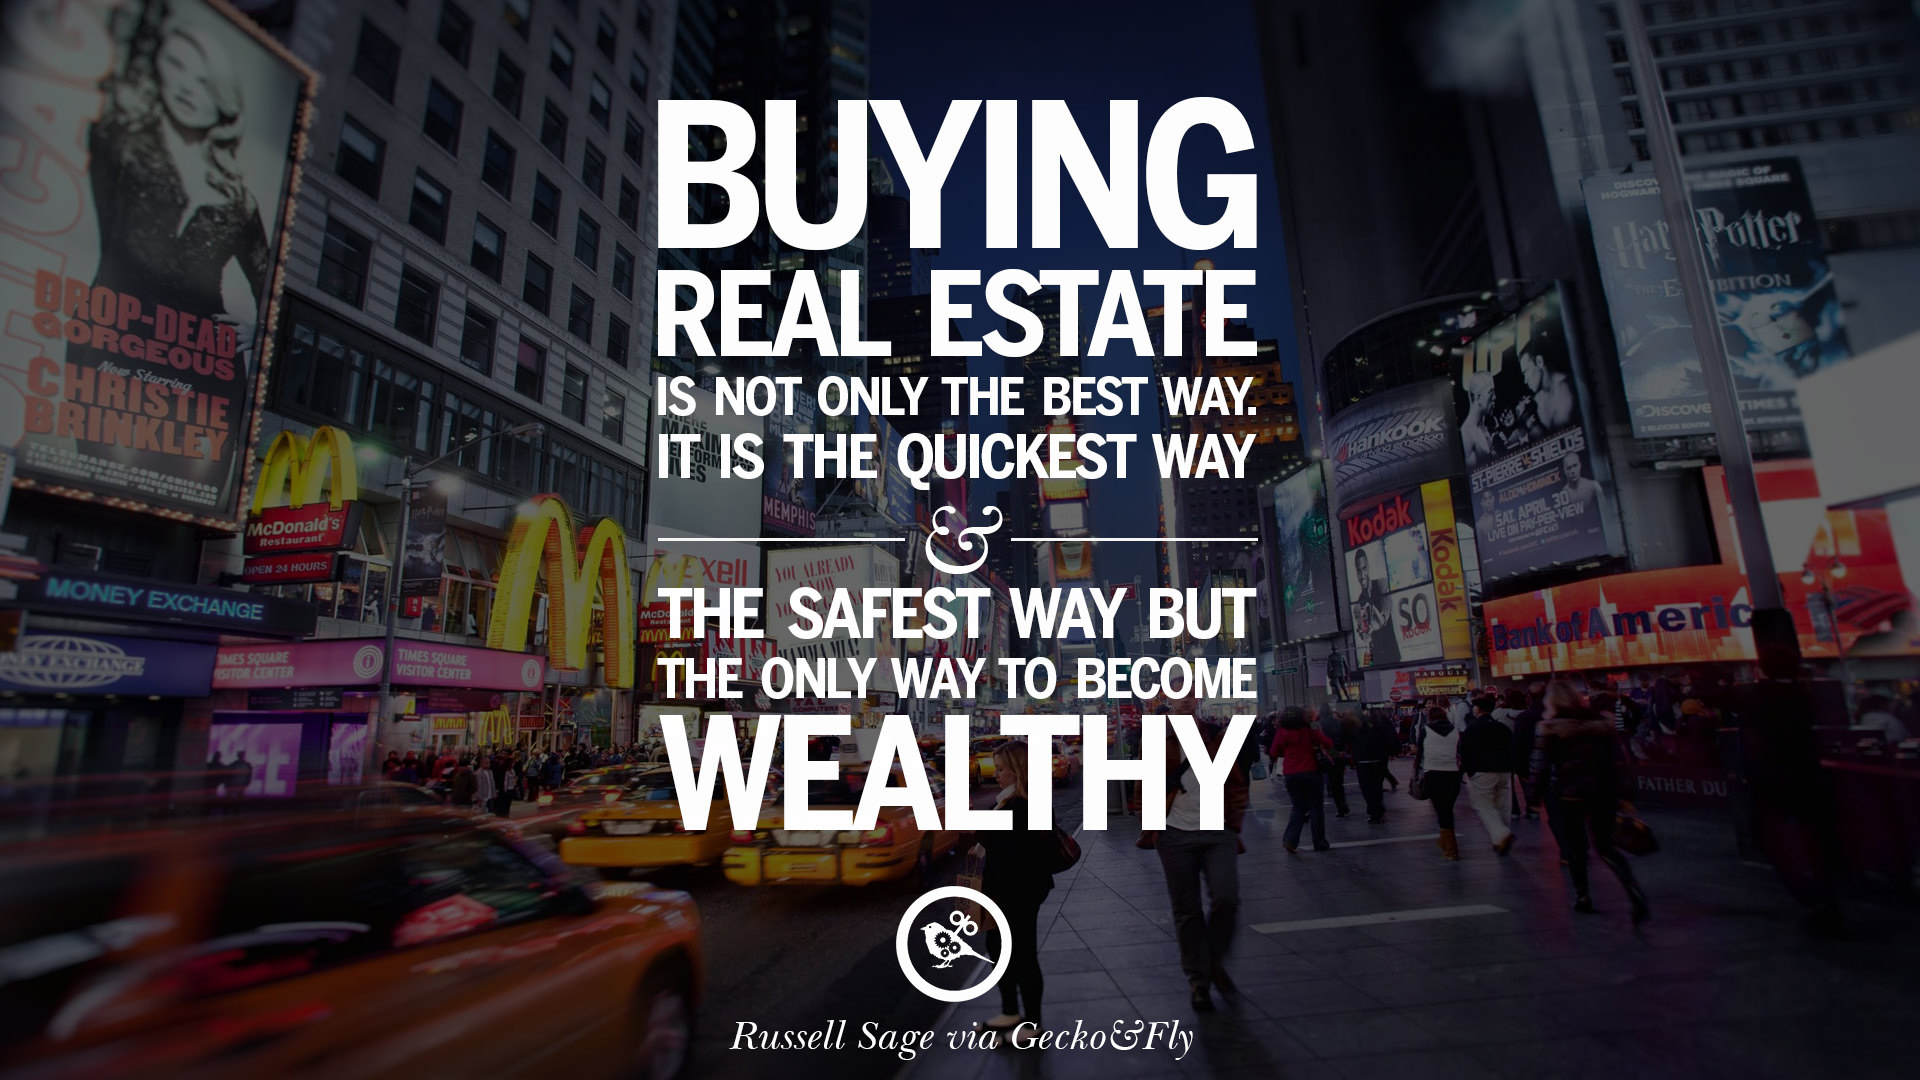 Here's Few Quotes To Help In Real Estate - The CORE